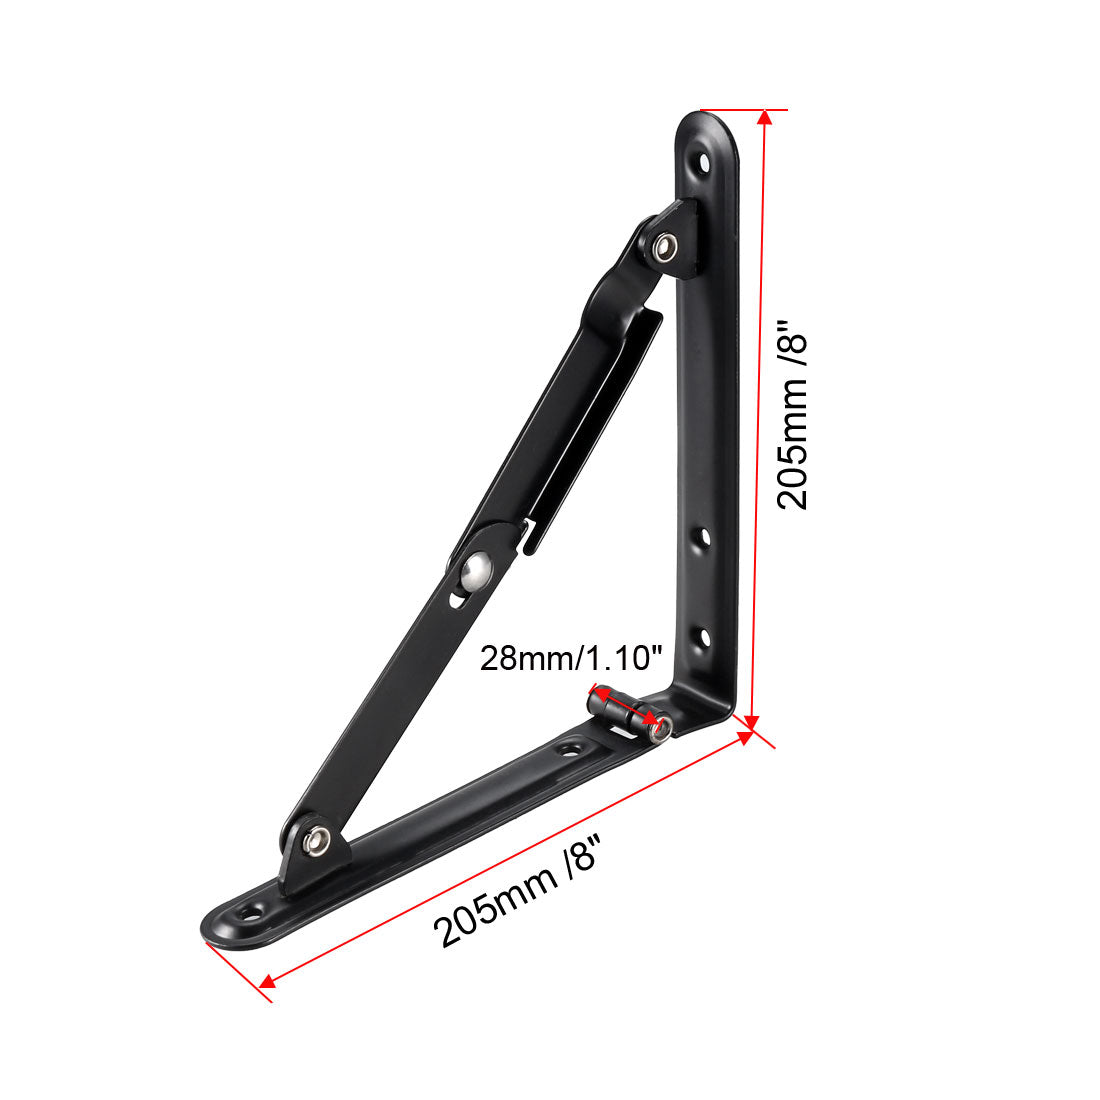 uxcell Uxcell Folding Bracket 8 inch 205mm for Shelves Table Desk Wall Mounted Support Collapsible Long Release Arm Space Saving Carbon Steel